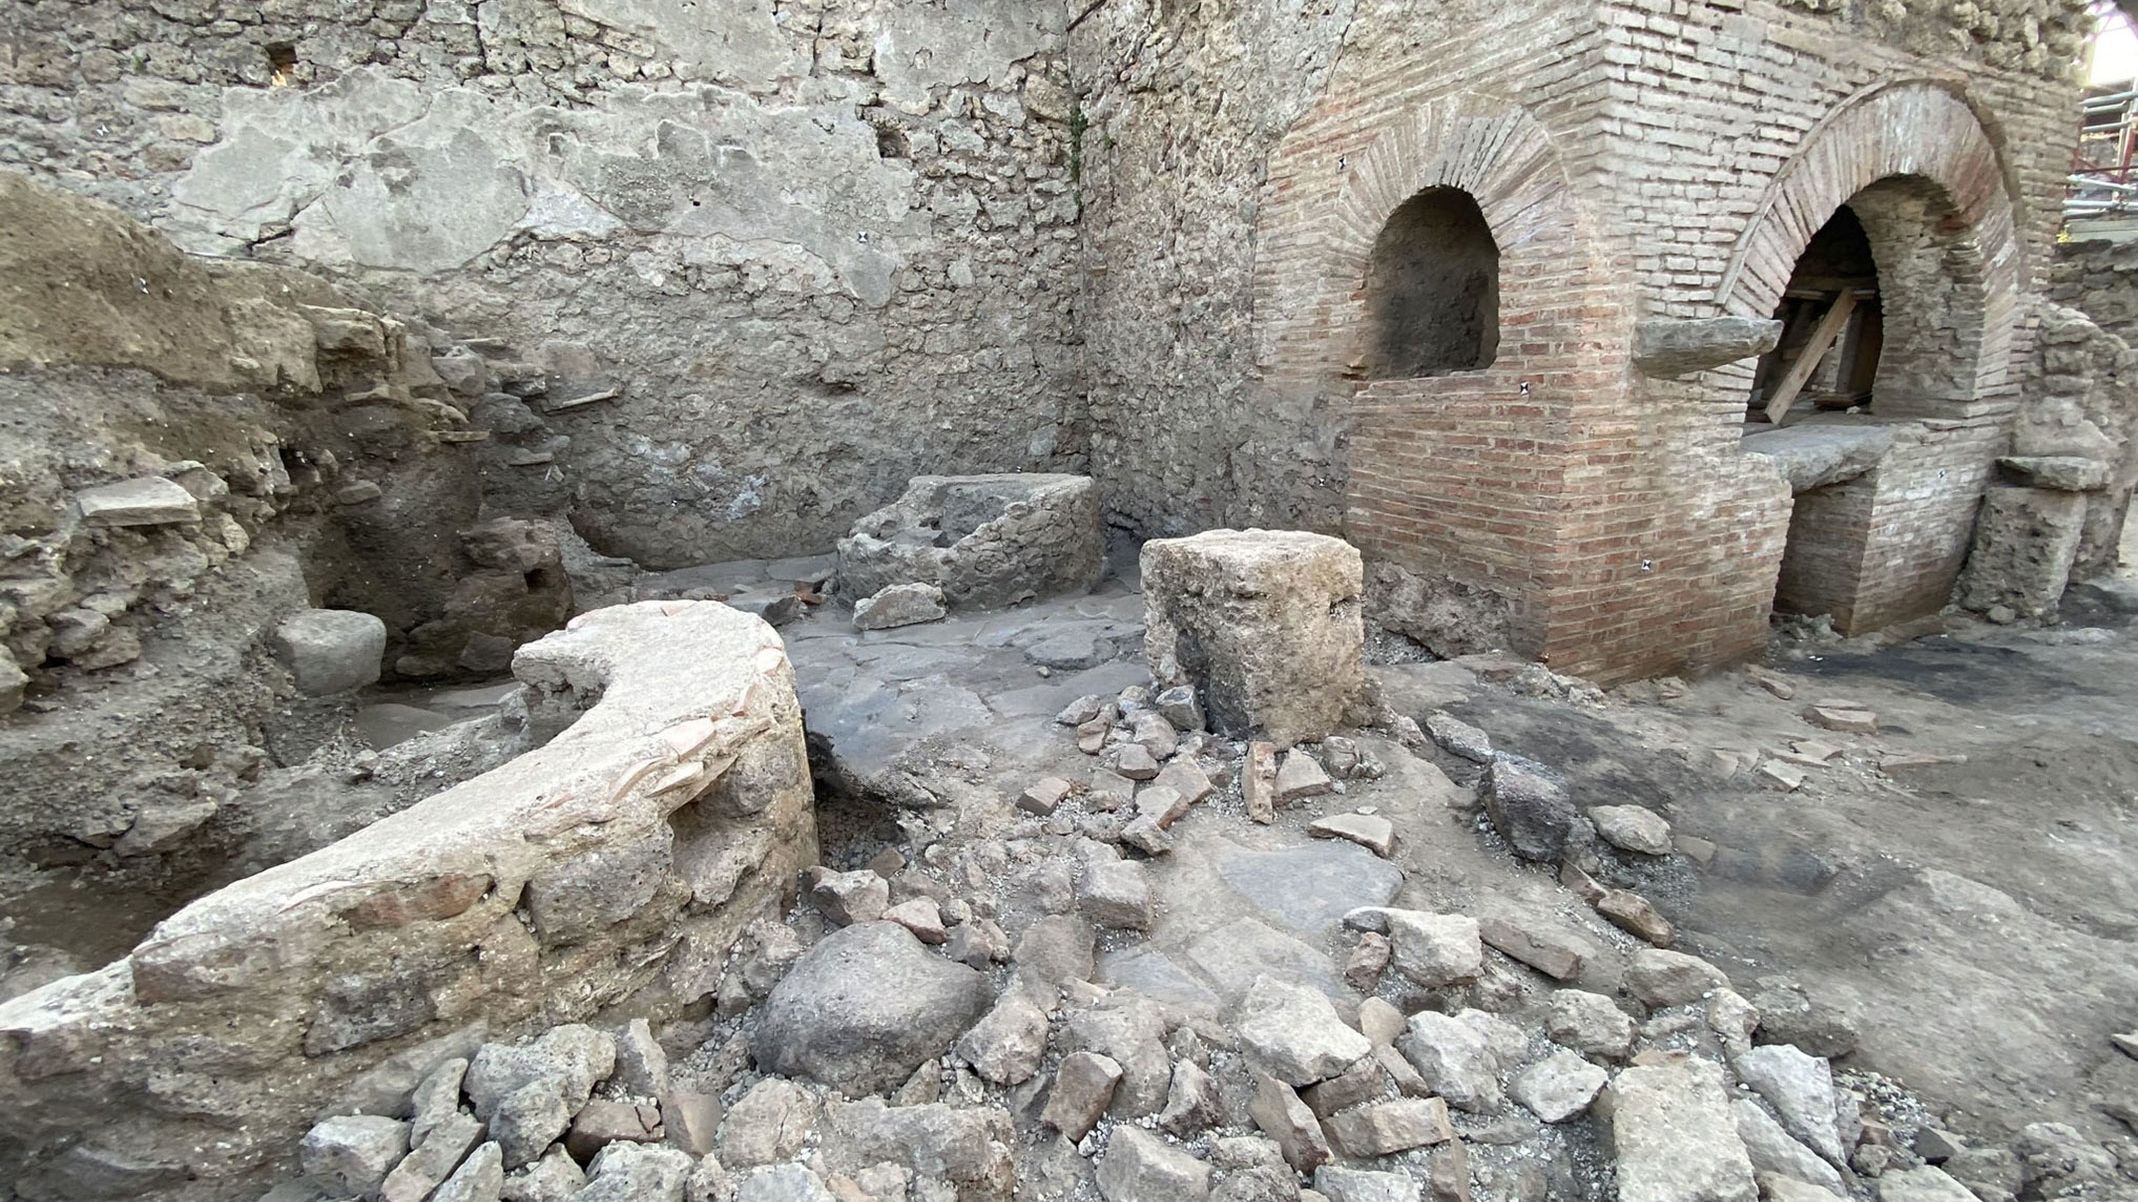 A view shows a "bakery-prison" where slaves and donkeys were locked up to grind the grain needed to make bread, in the ancient archeological site of Pompeii, Italy, in this handout photo obtained by Reuters on December 8.